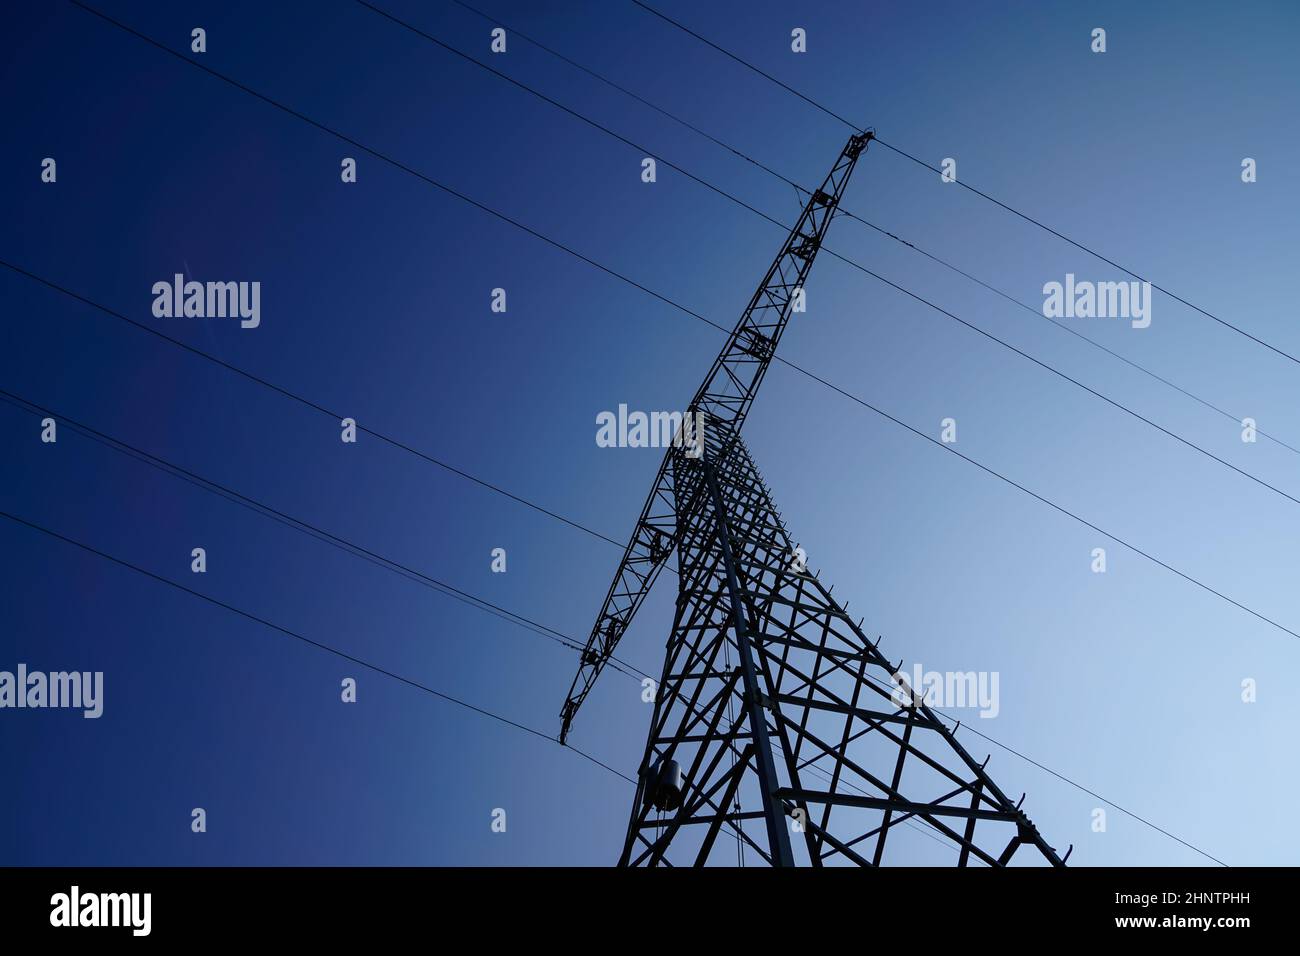 Electricity mast or overhead line mast for power supply and power distribution in the power grid Stock Photo